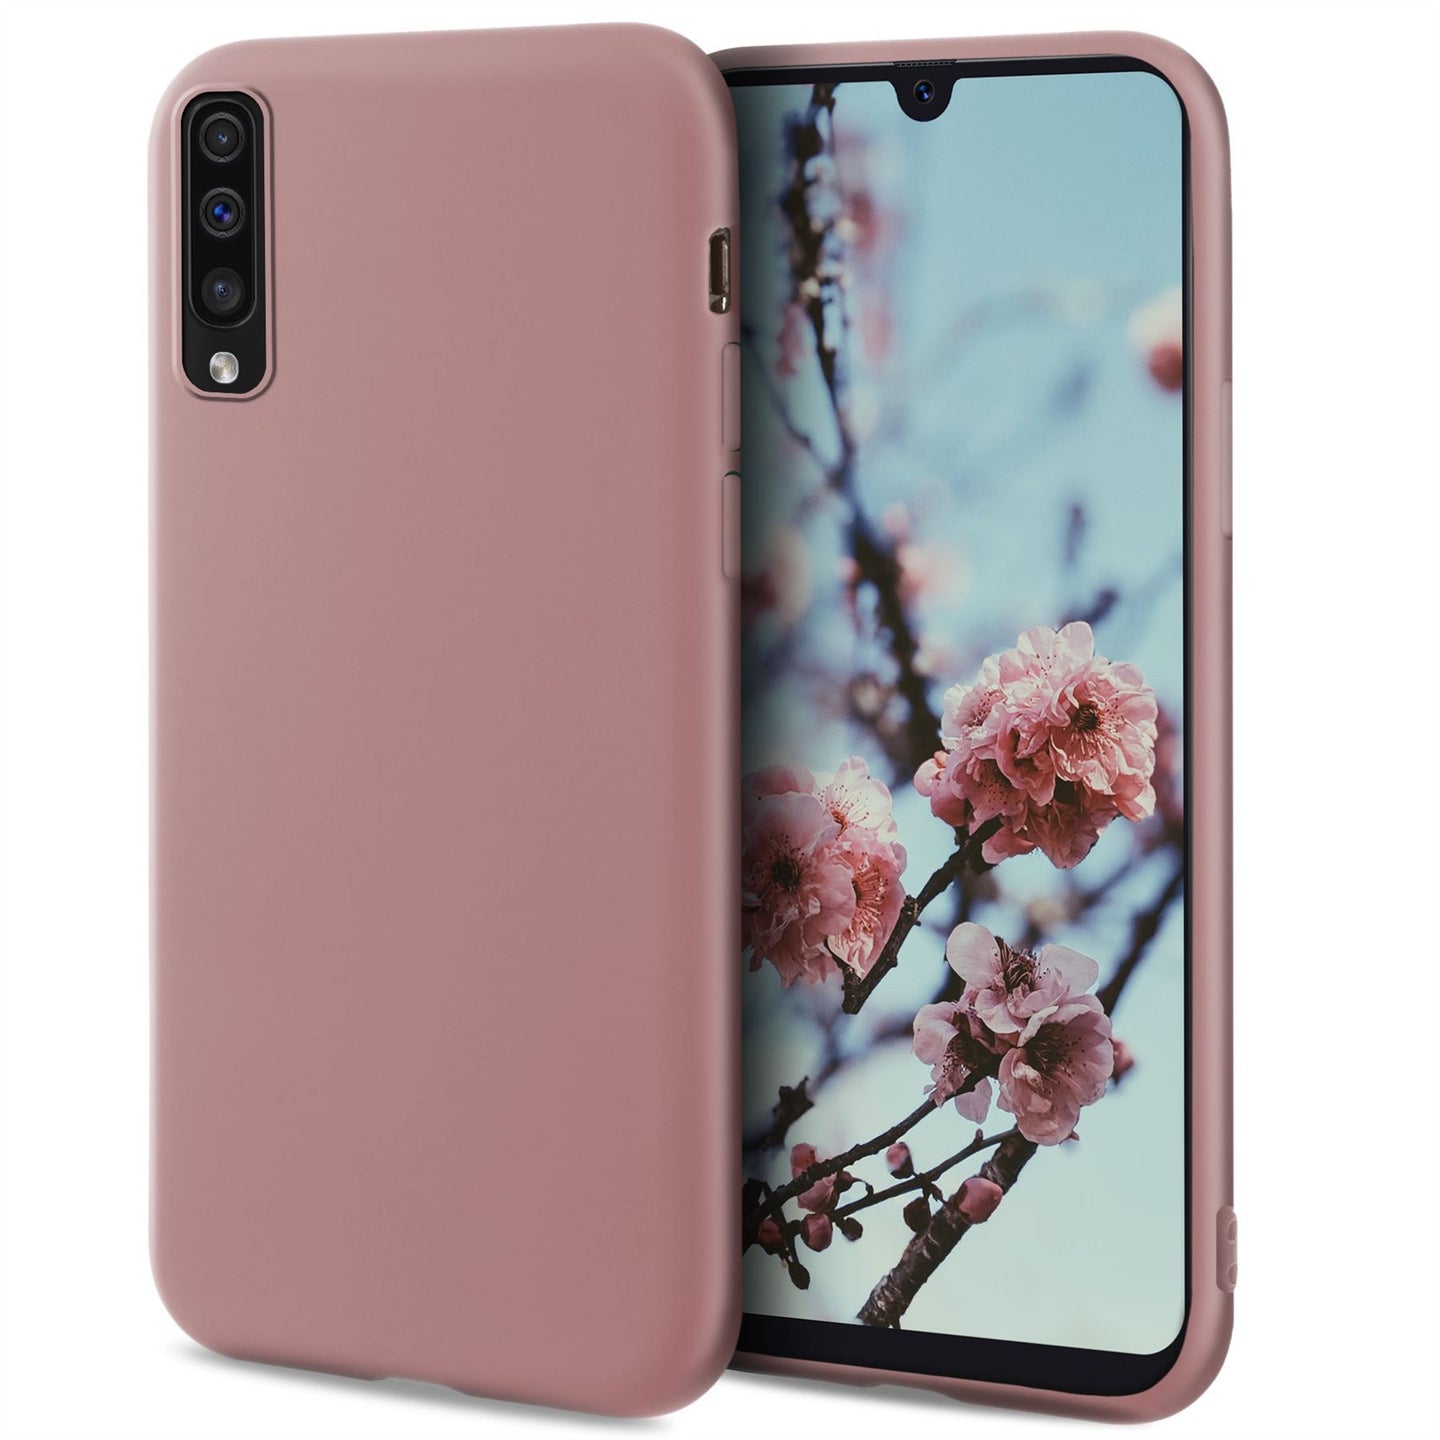 Moozy Minimalist Series Silicone Case for Samsung A50, Rose Beige - Matte Finish Slim Soft TPU Cover